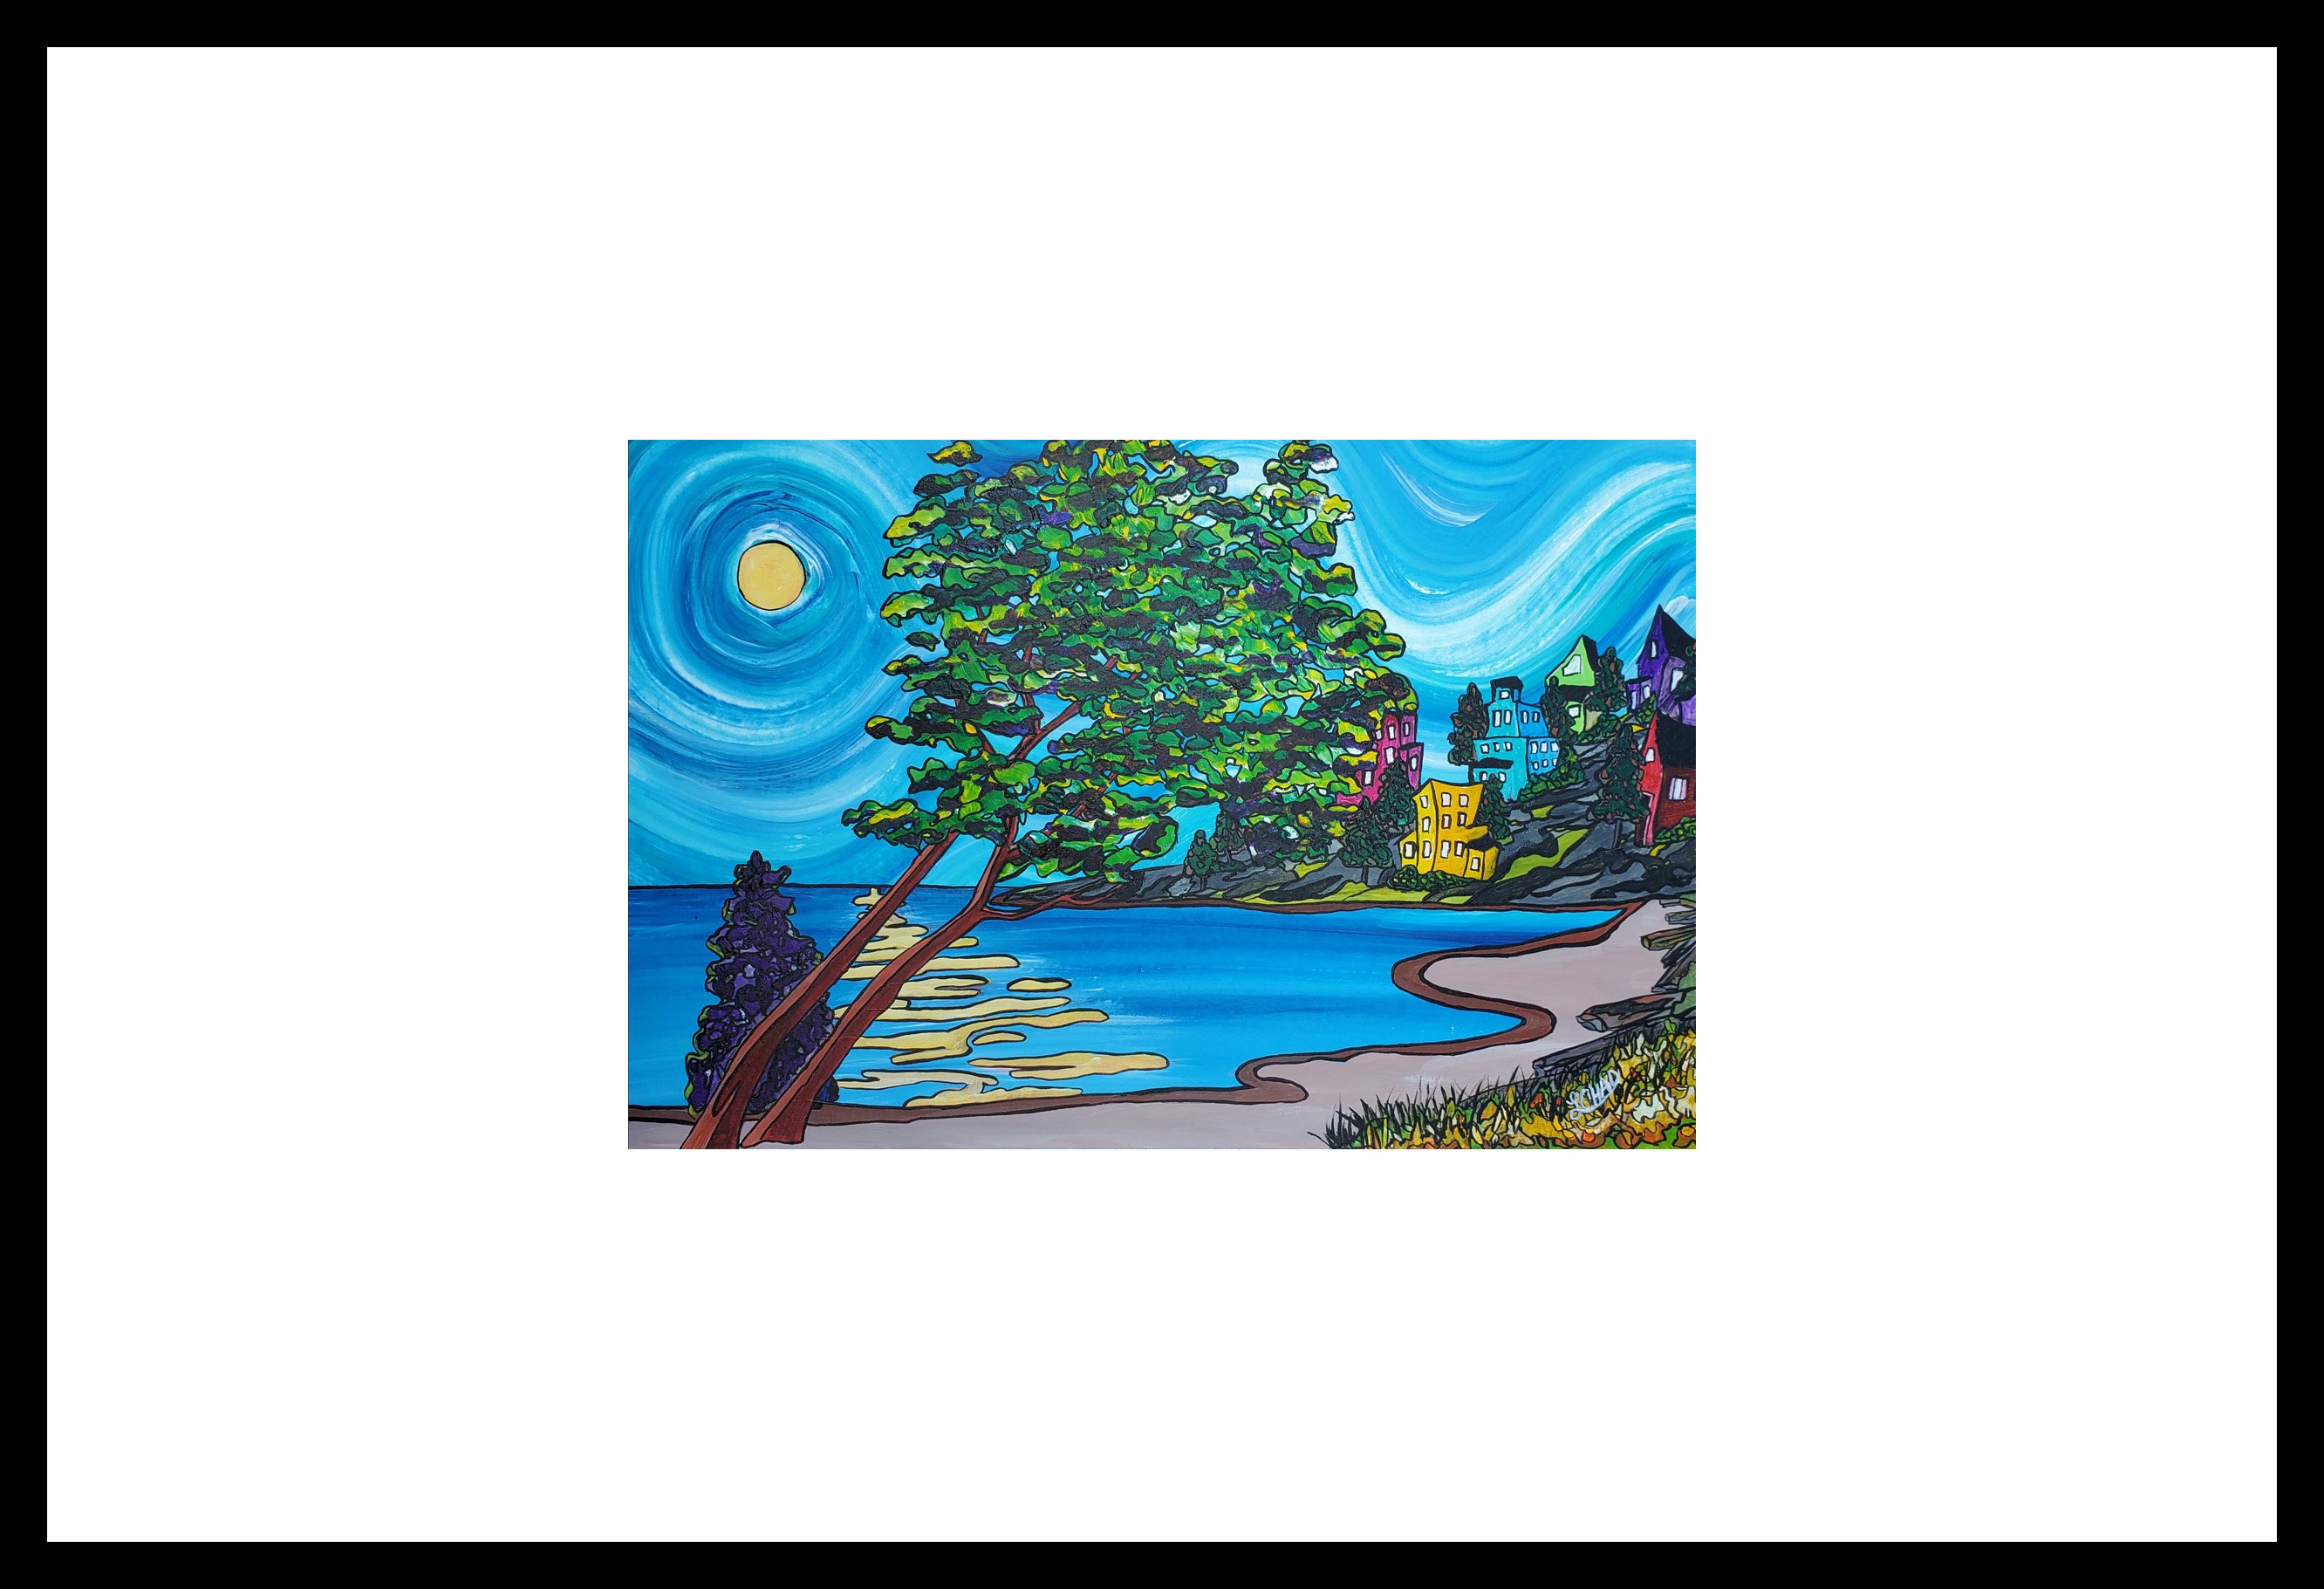 2019-12 "Arbutus on the Water"
Image: 16.75" x 11"
Framed: 24" x 18"
Acrylic on 246 lb paper
$350.00